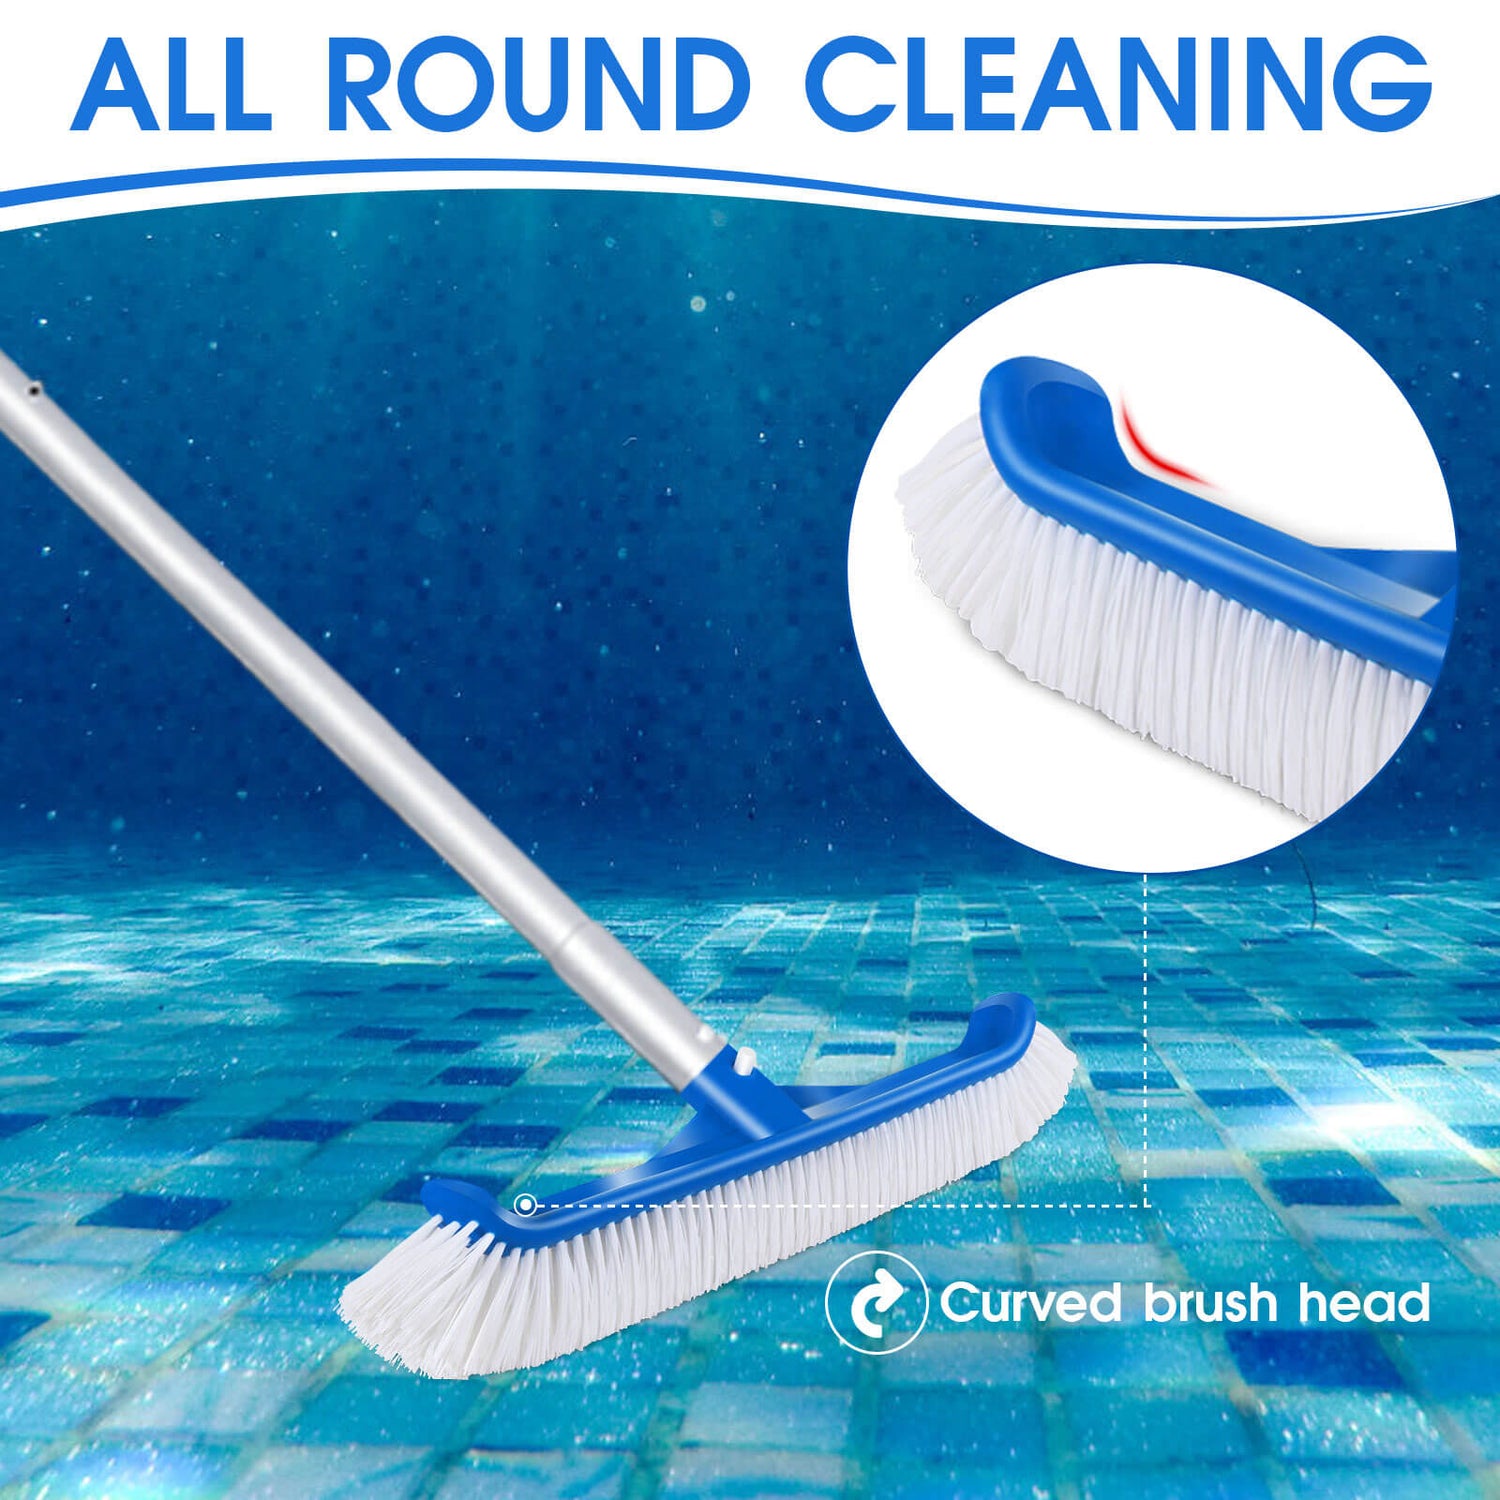 Masthome Pool Cleaning Kit (Pool Brush, Pool Skimmer Net, Floating Pool Thermometer)